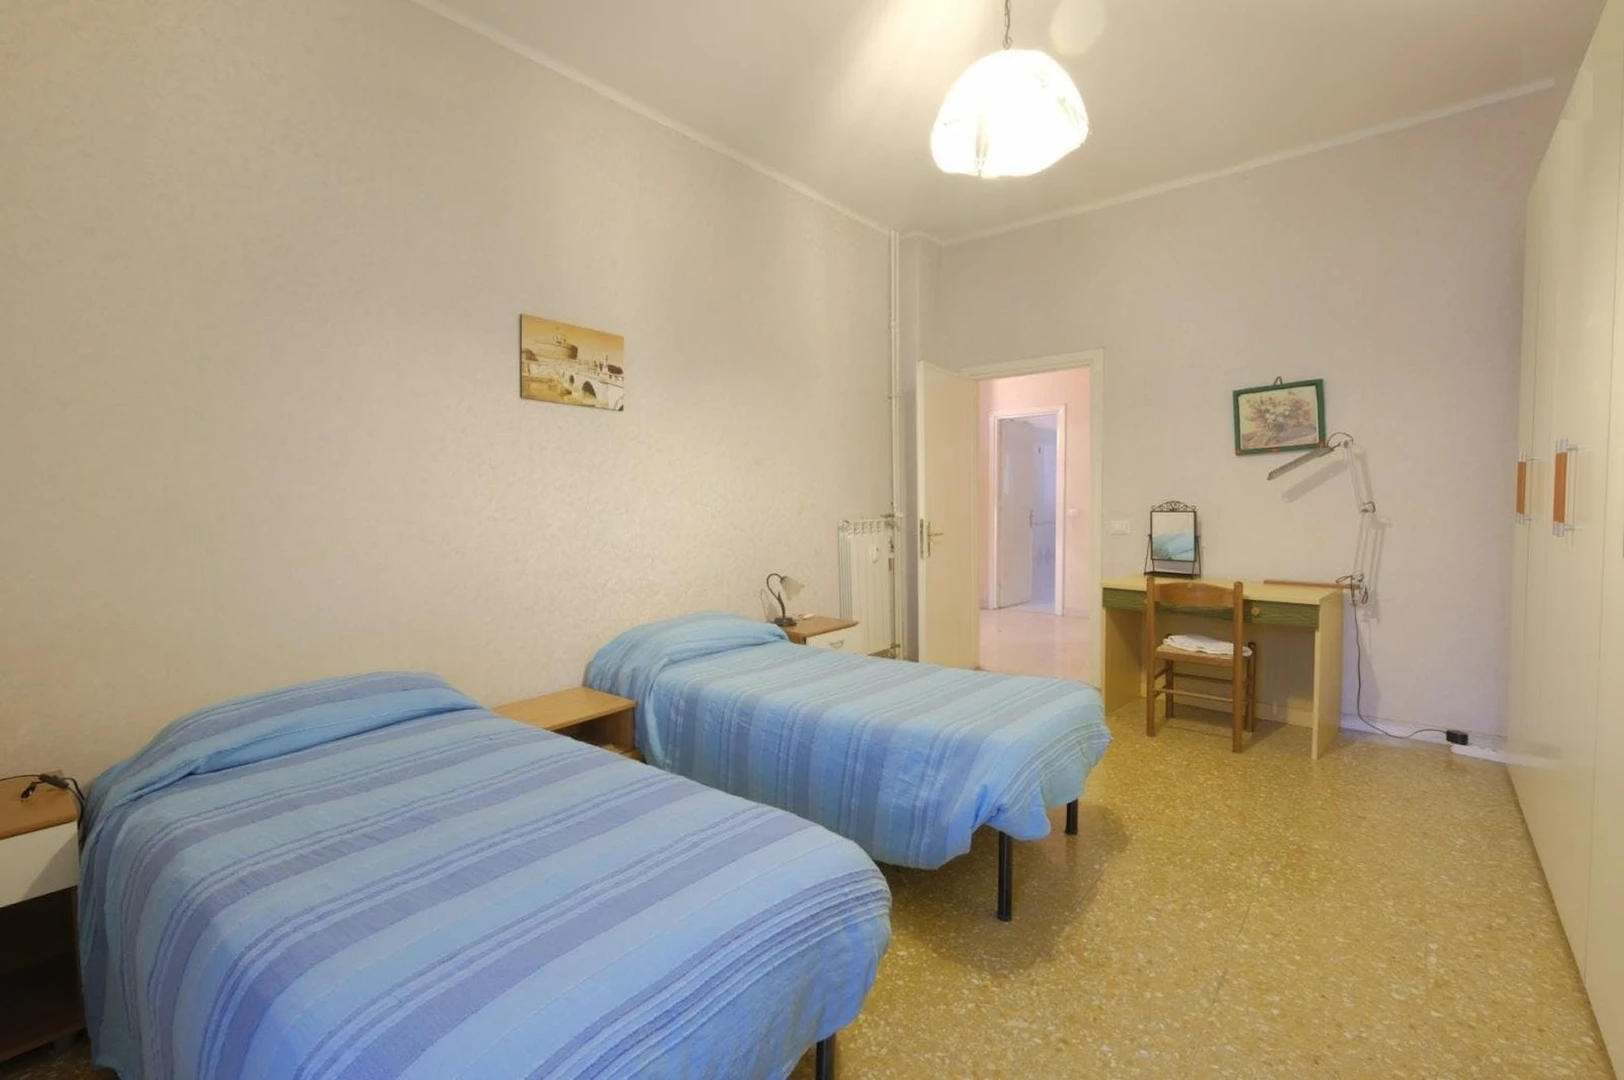 Cheap shared room in roma